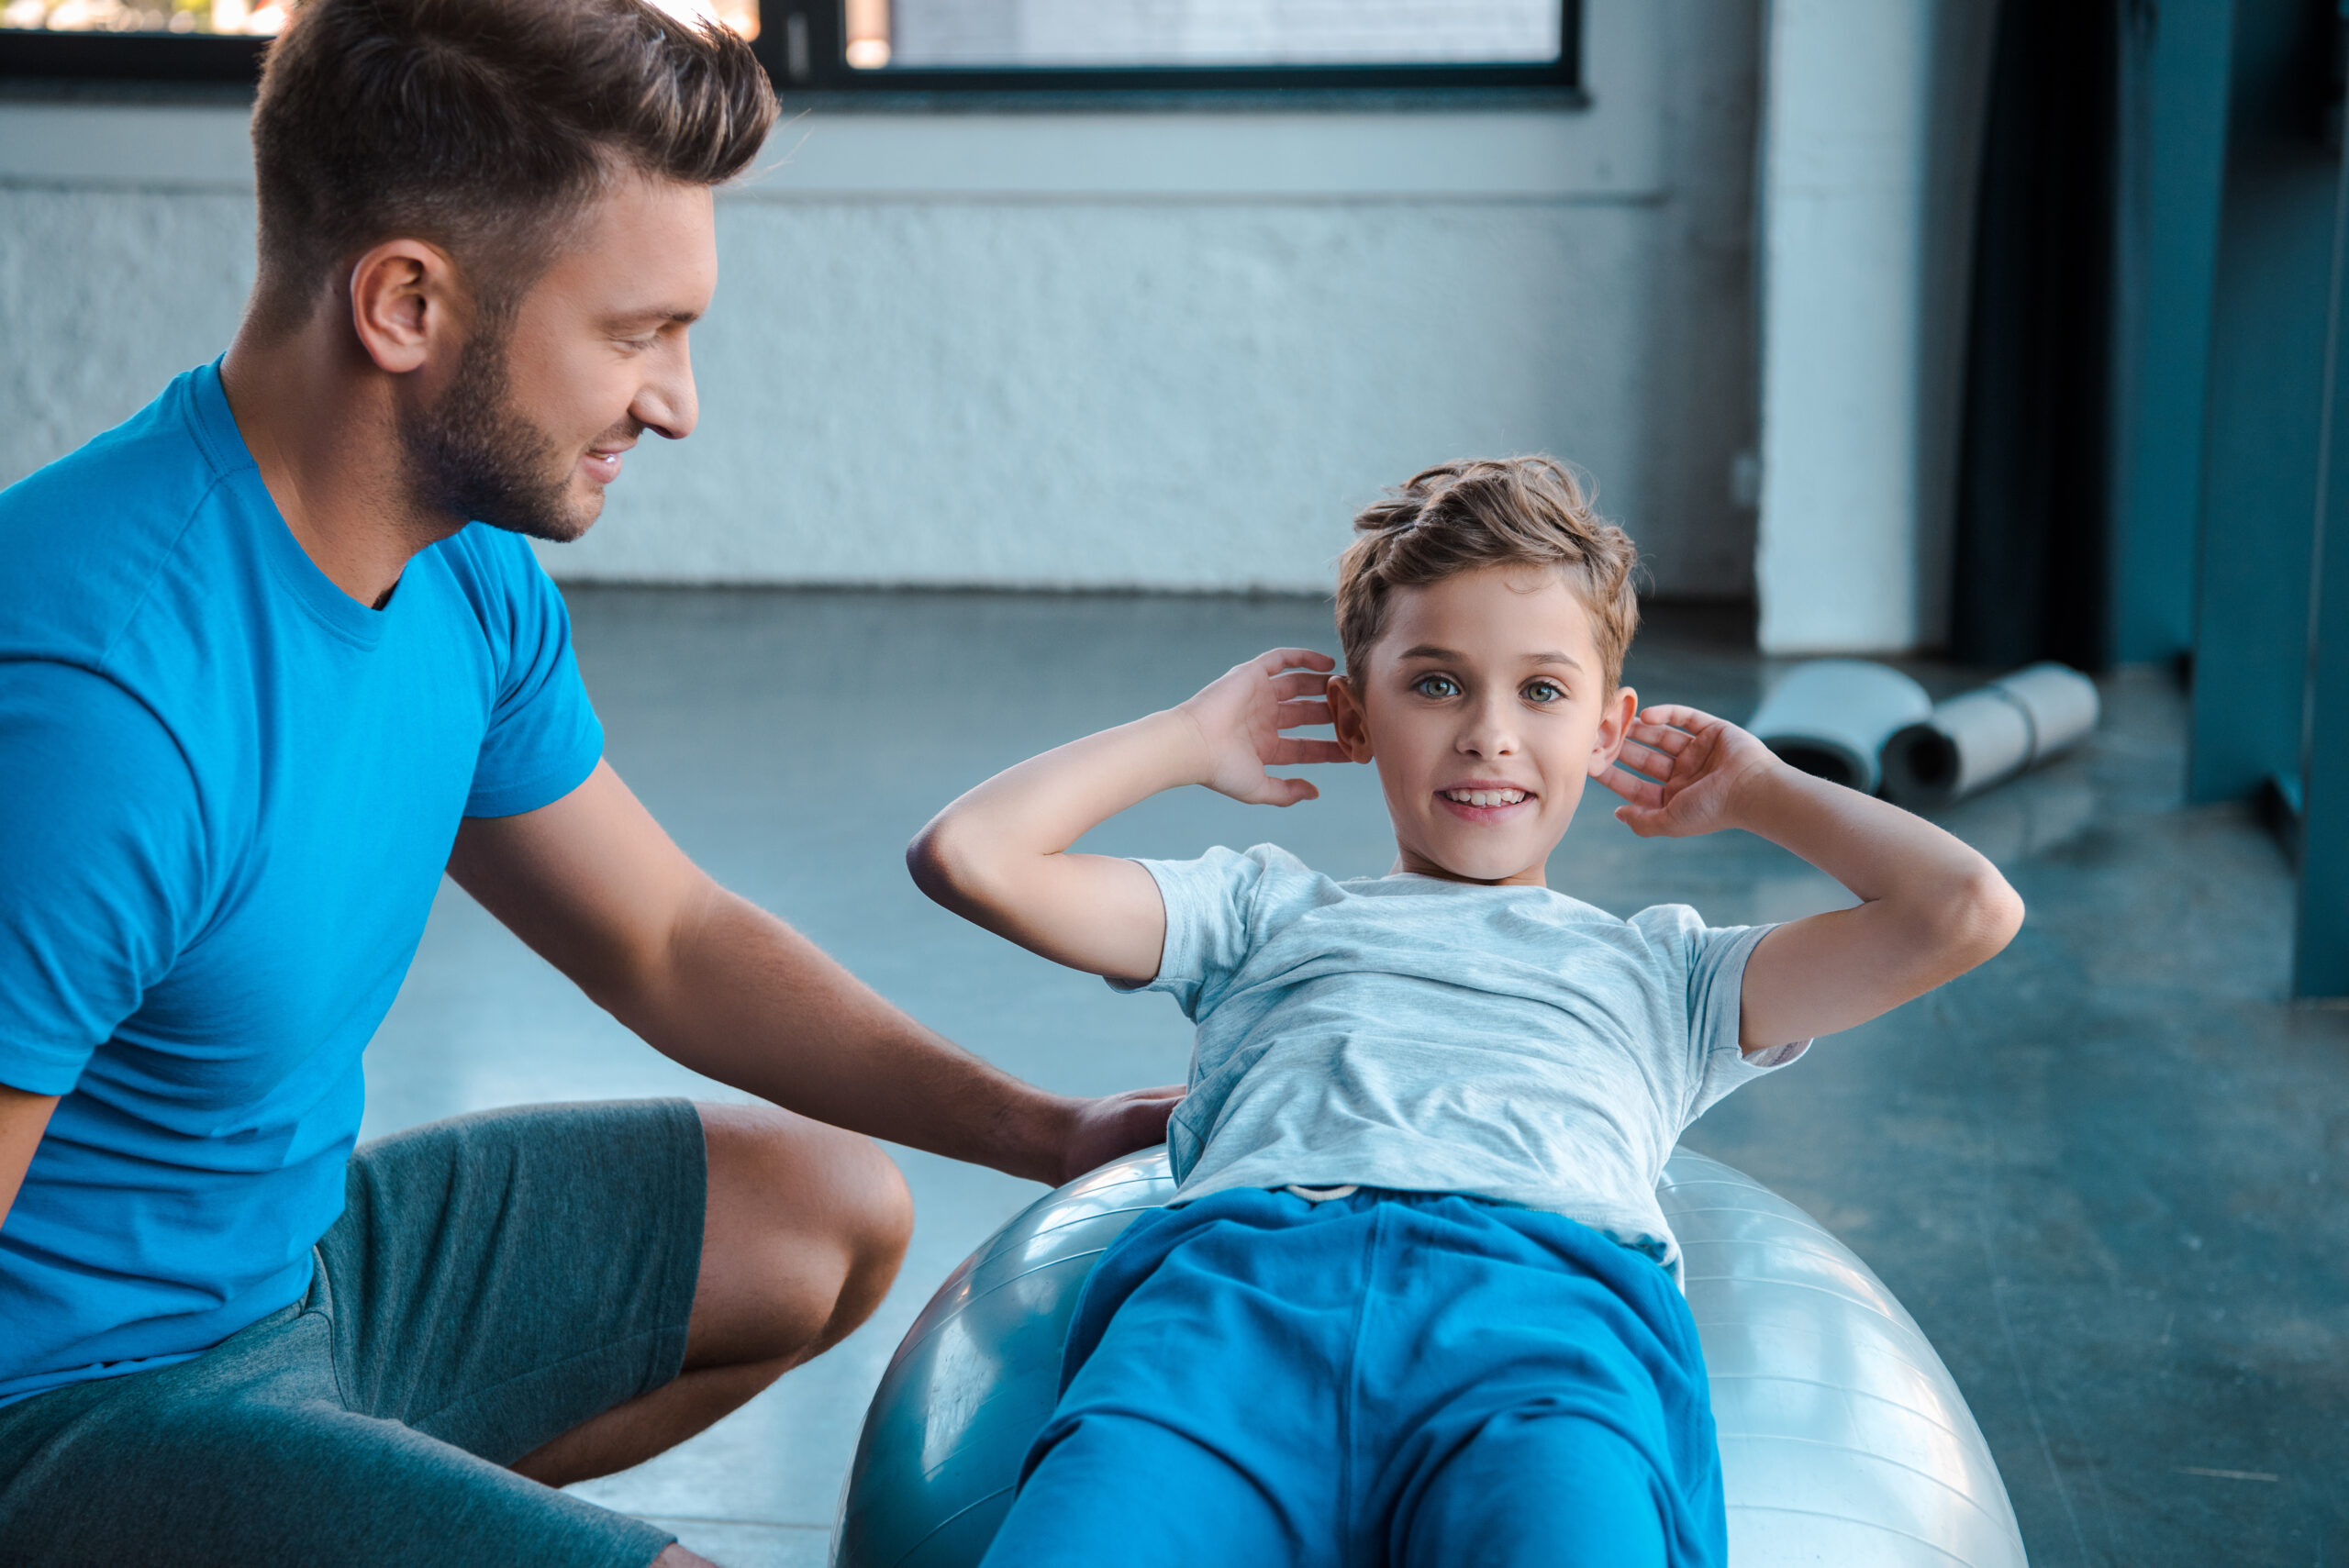 Which workout is best for kids?